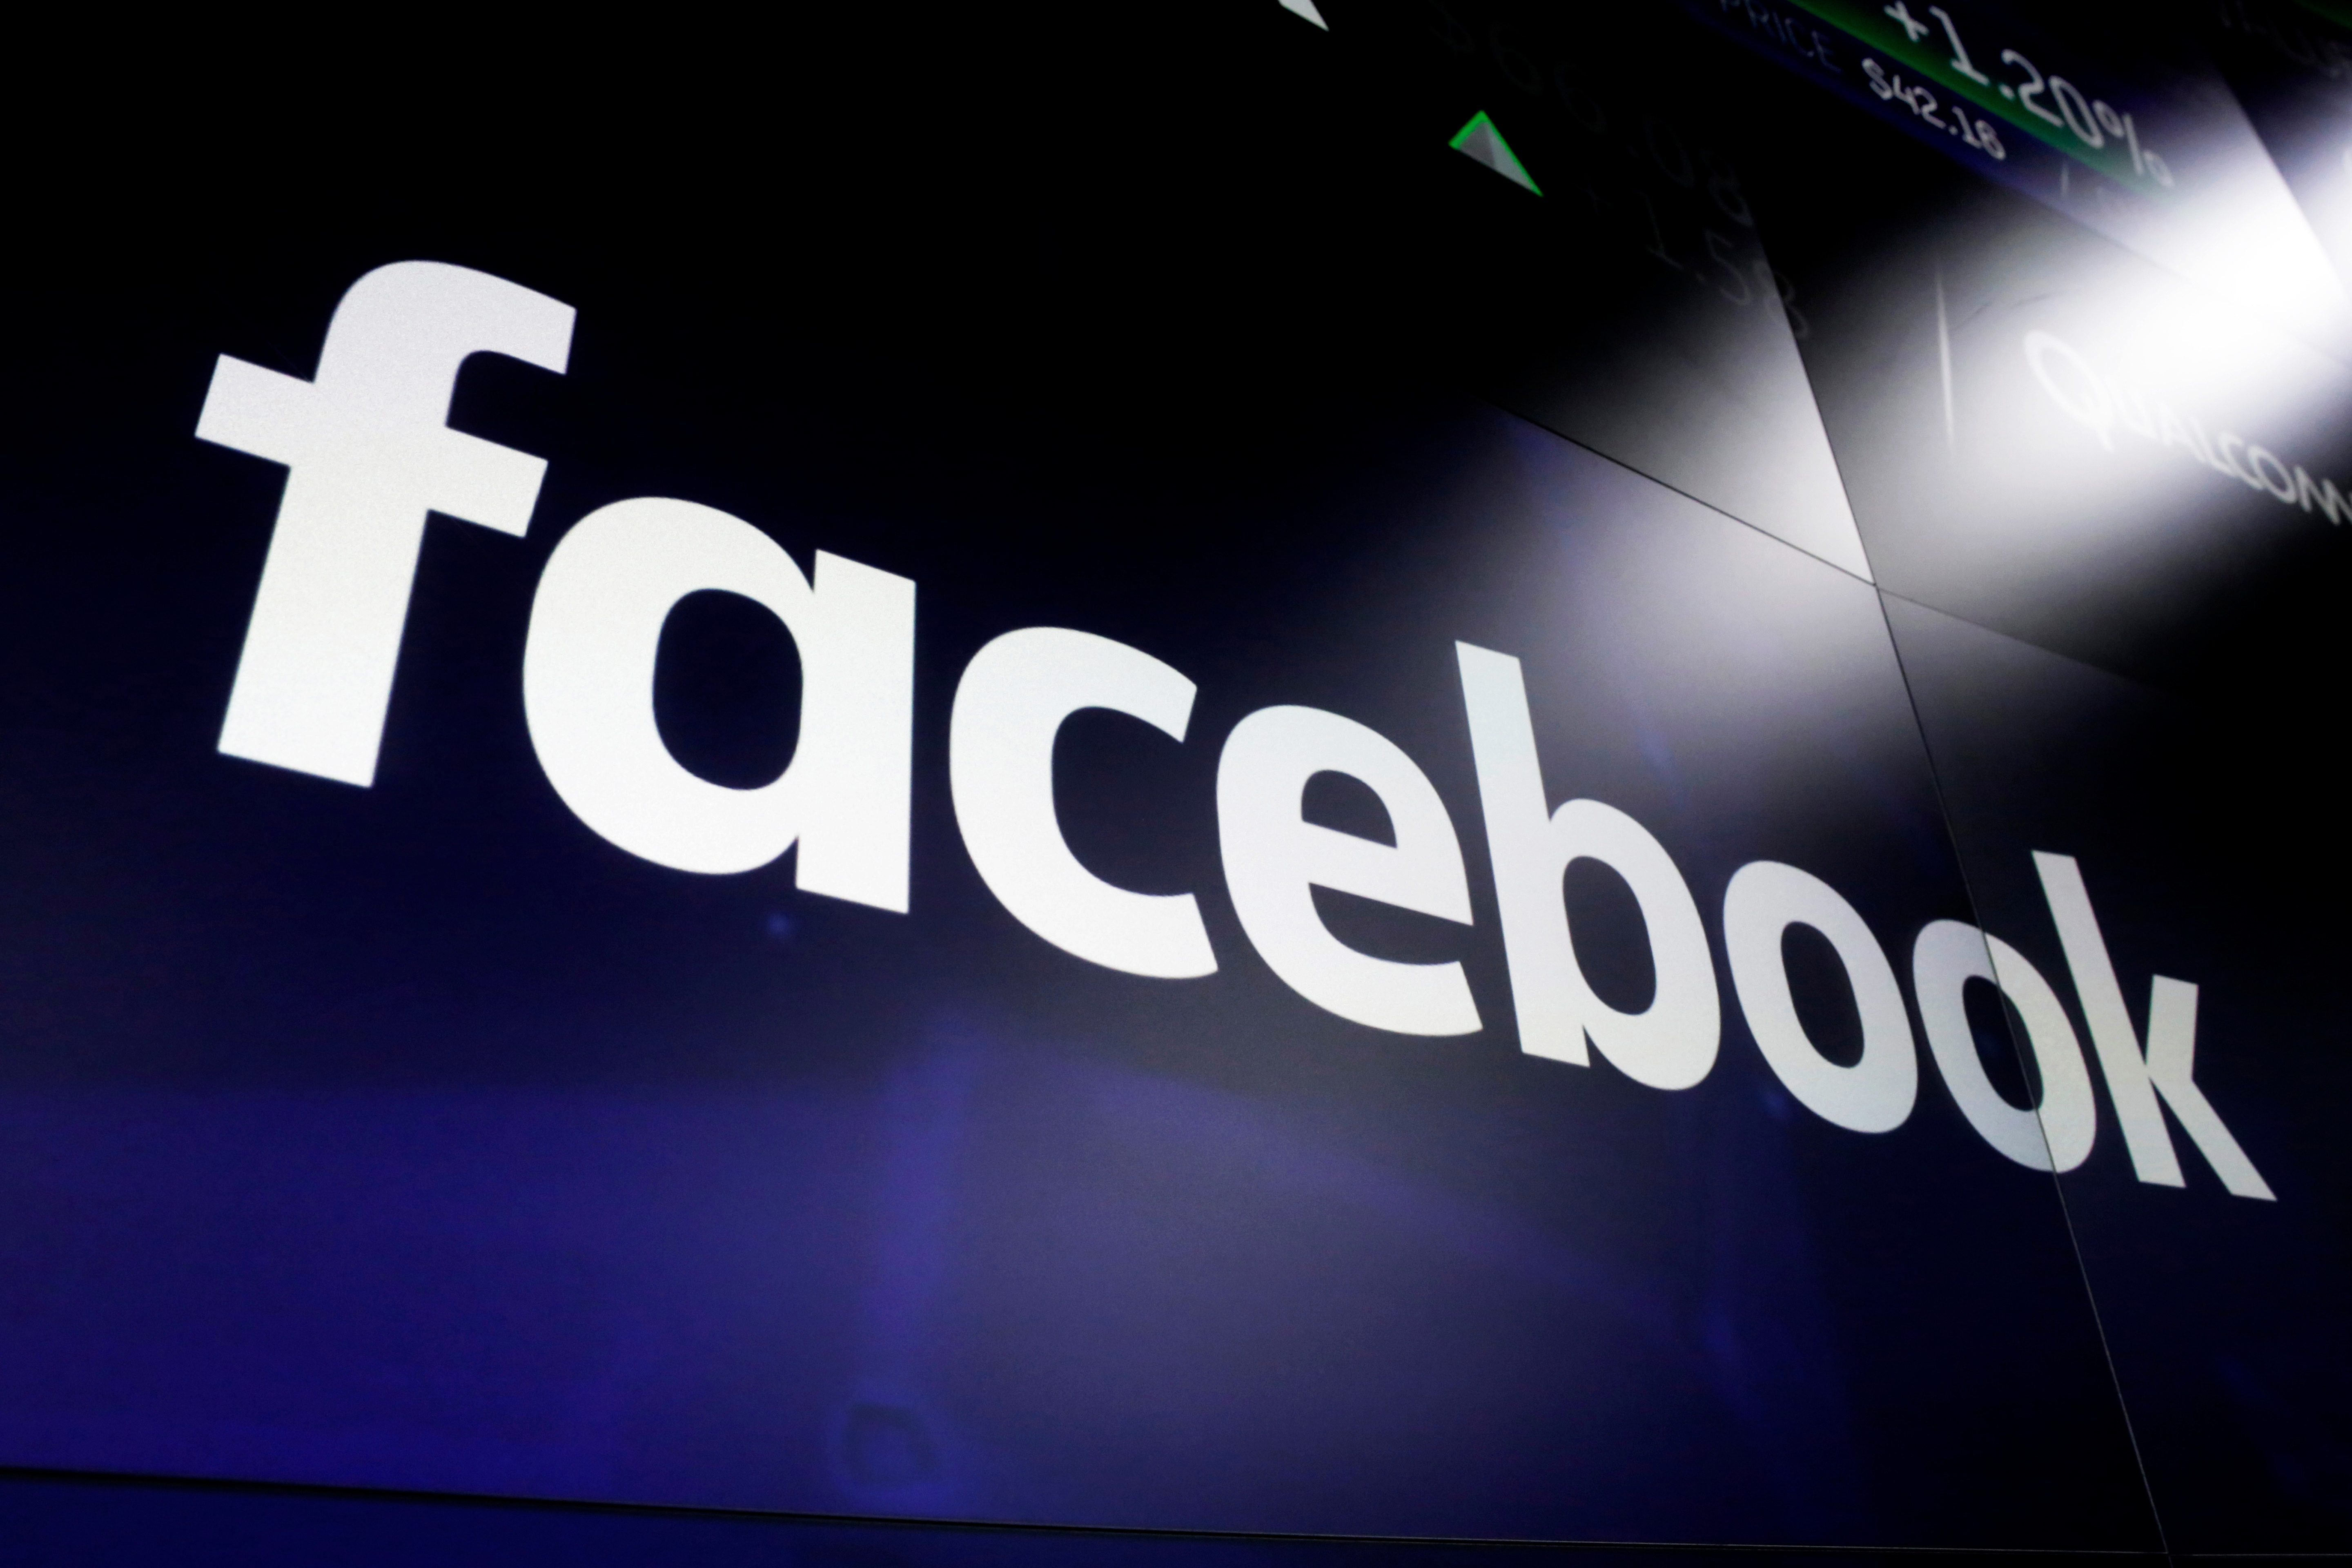 Facebook Asks Court To Dismiss FTC Antitrust Complaint Amid Worldwide Outage